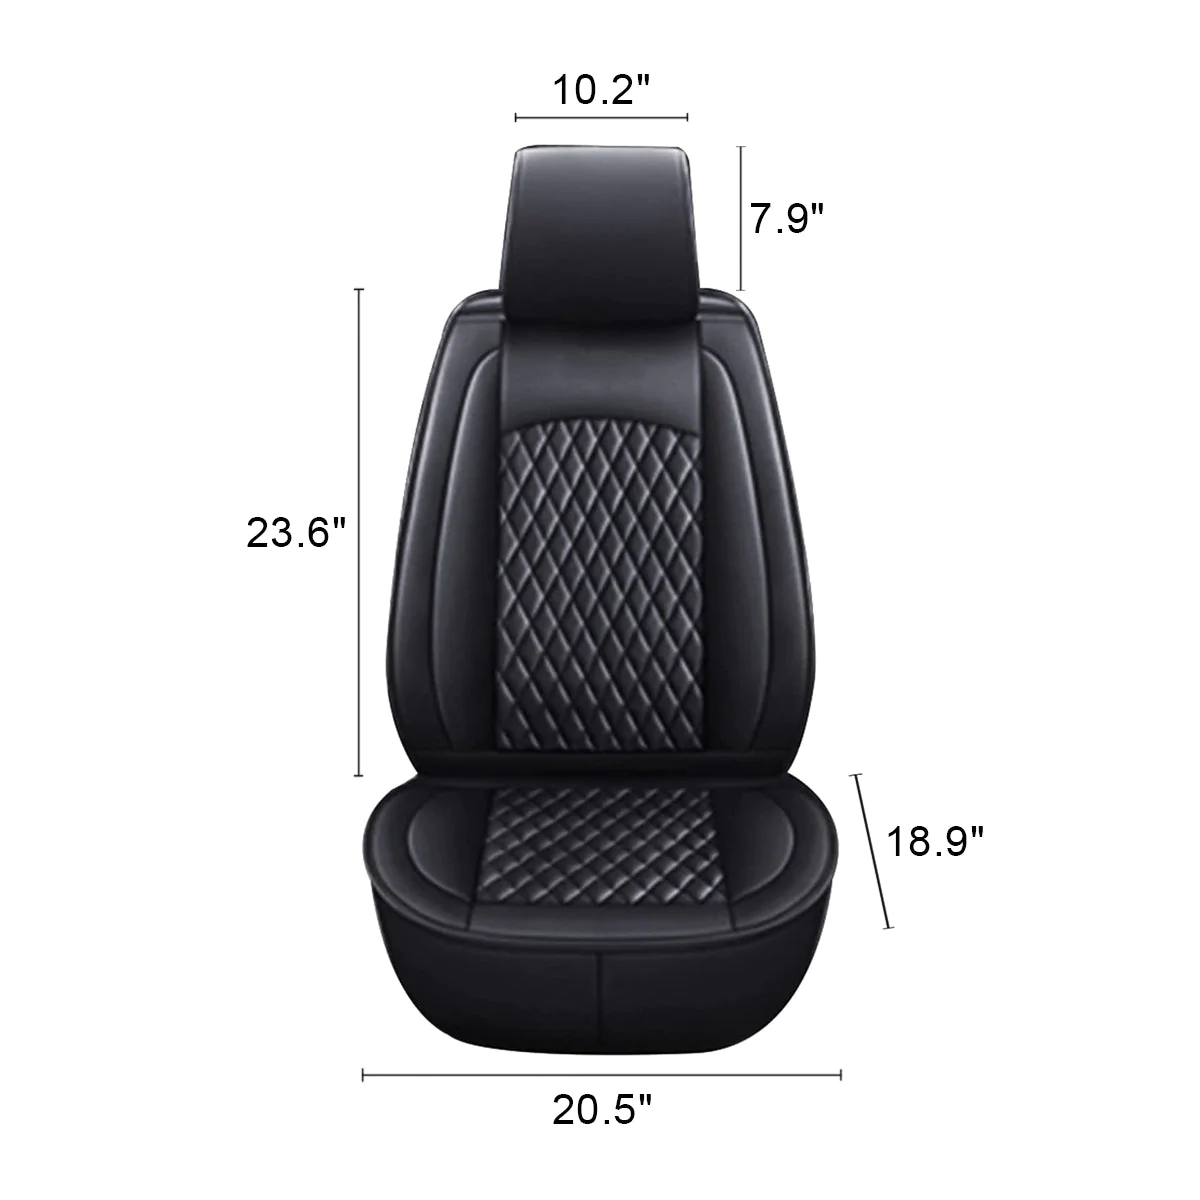 Custom Text For Seat Covers 5 Seats Full Set, Custom Fit For Your Cars, Leatherette Automotive Seat Cushion Protector Universal Fit, Vehicle Auto Interior Decor FJ13988